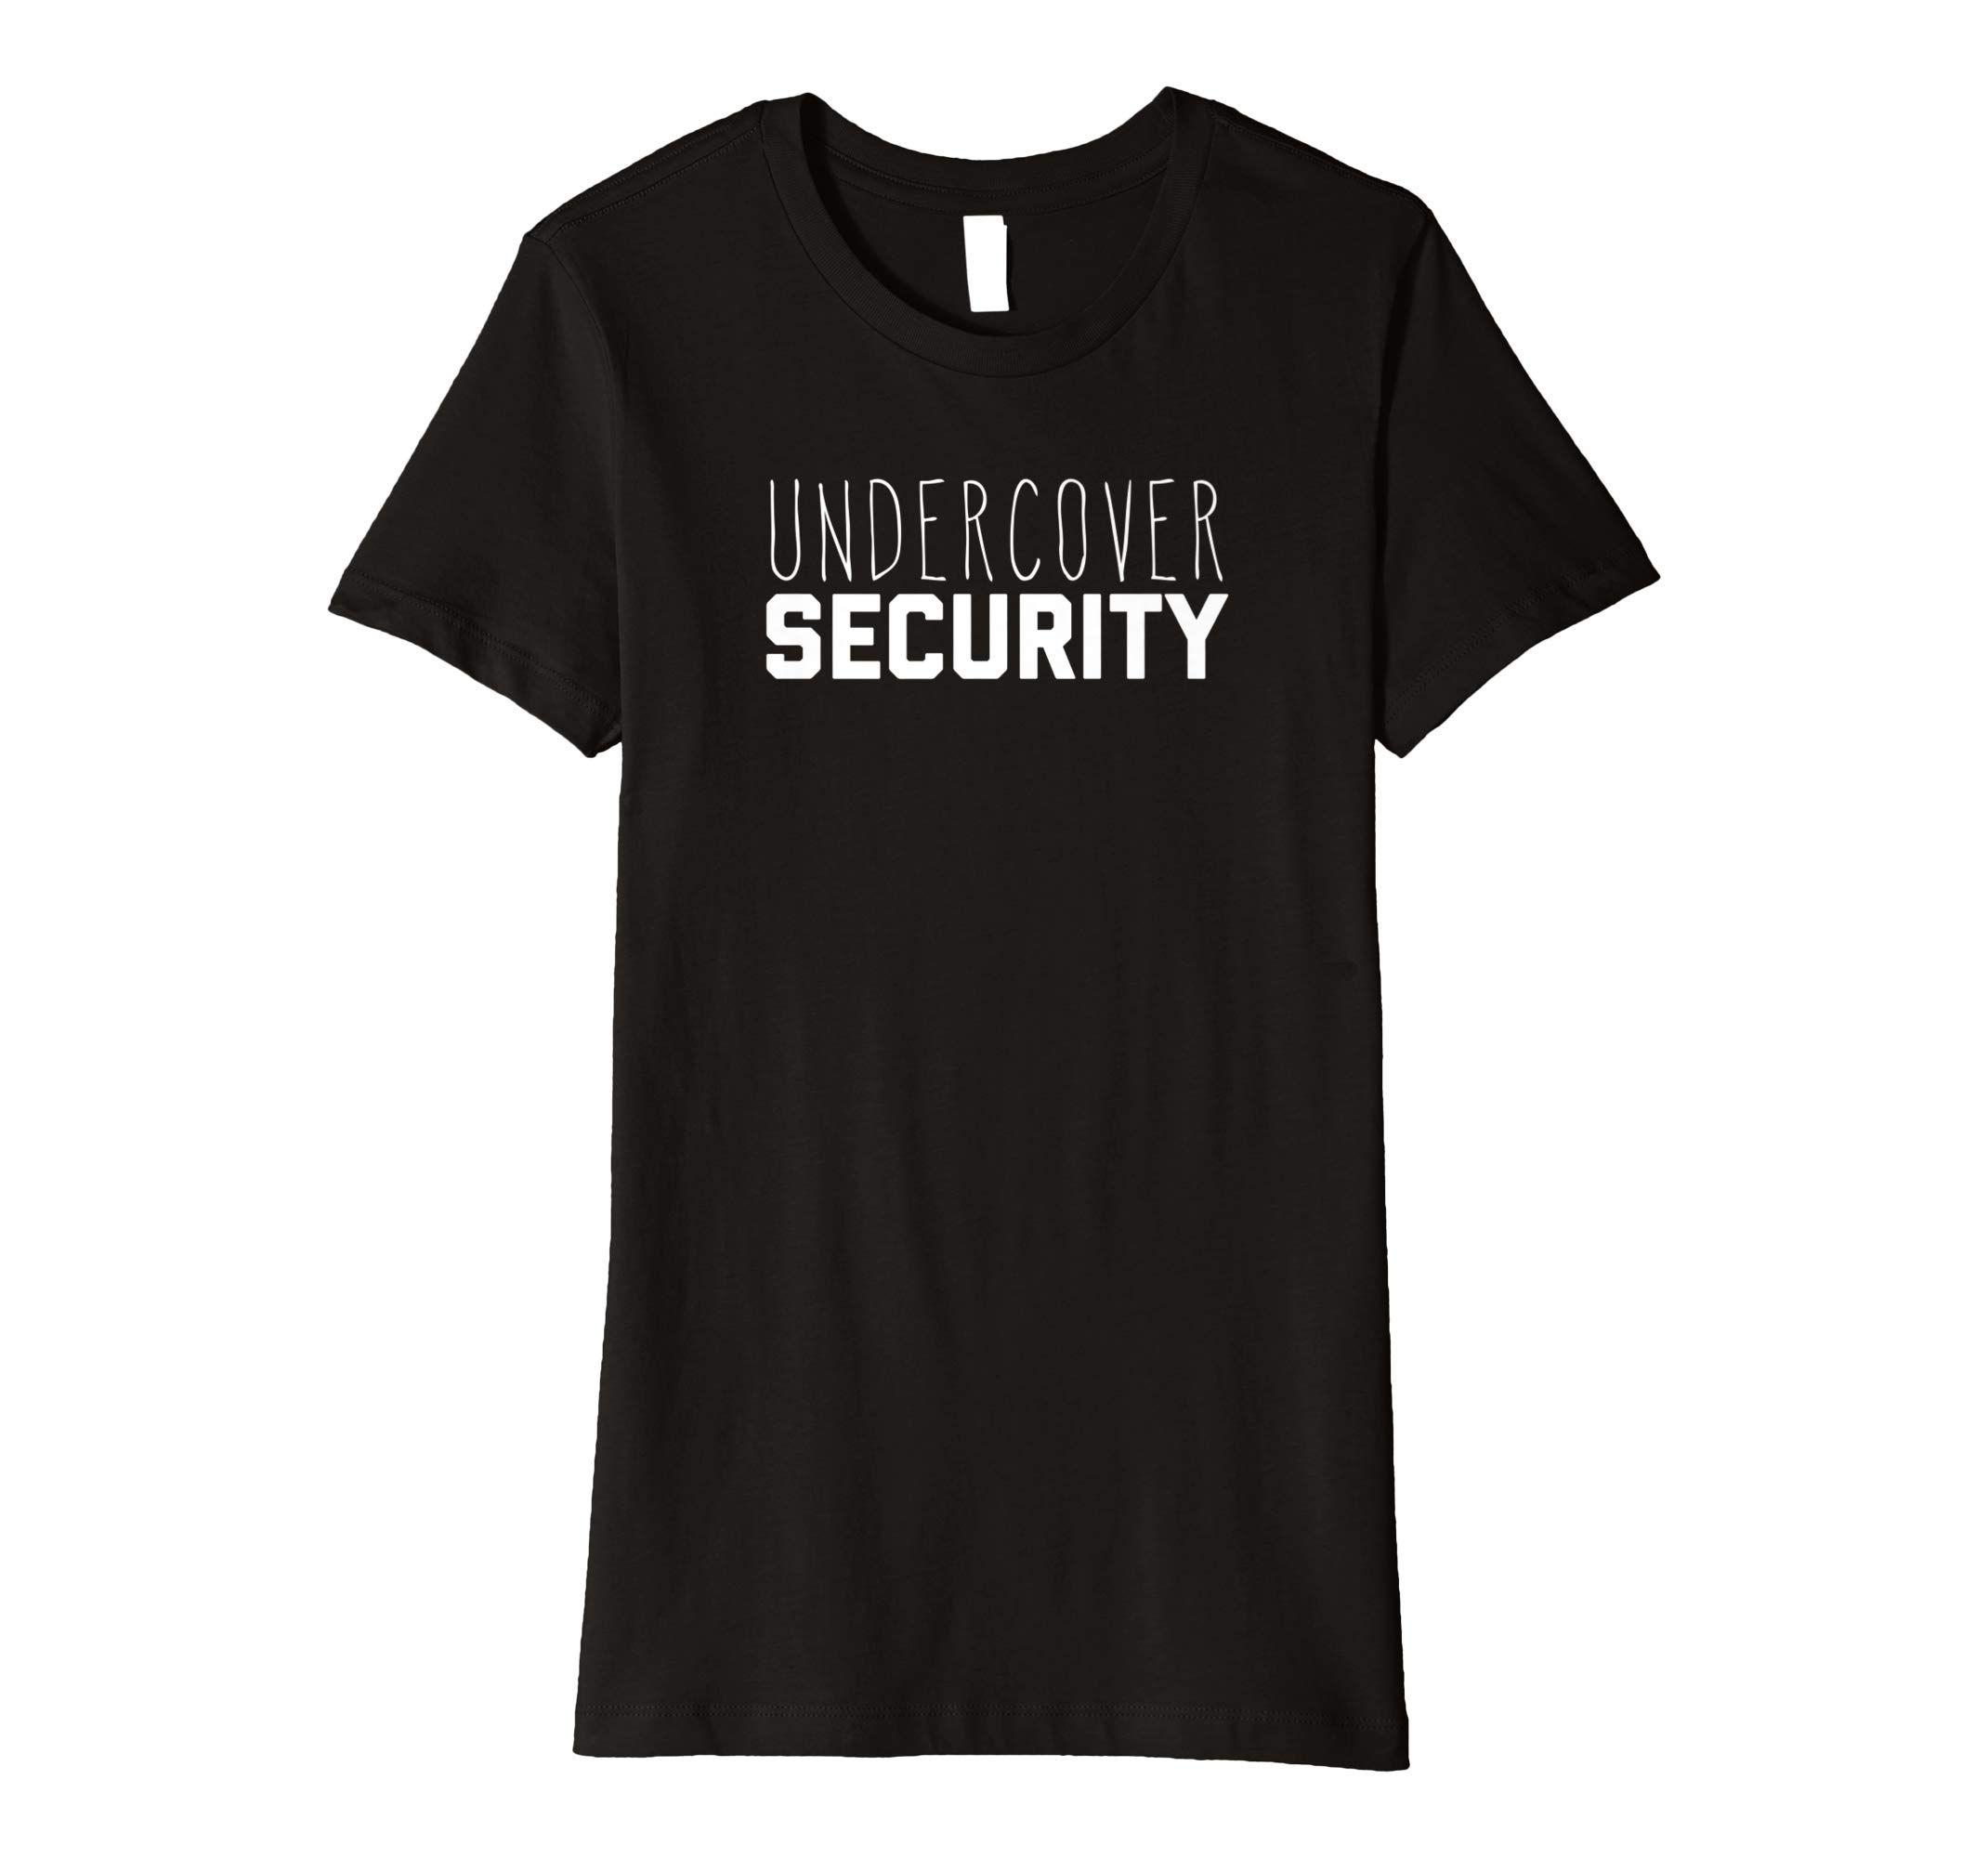 Undercover Security Logo - Amazon.com: Undercover Security Shirt: Clothing